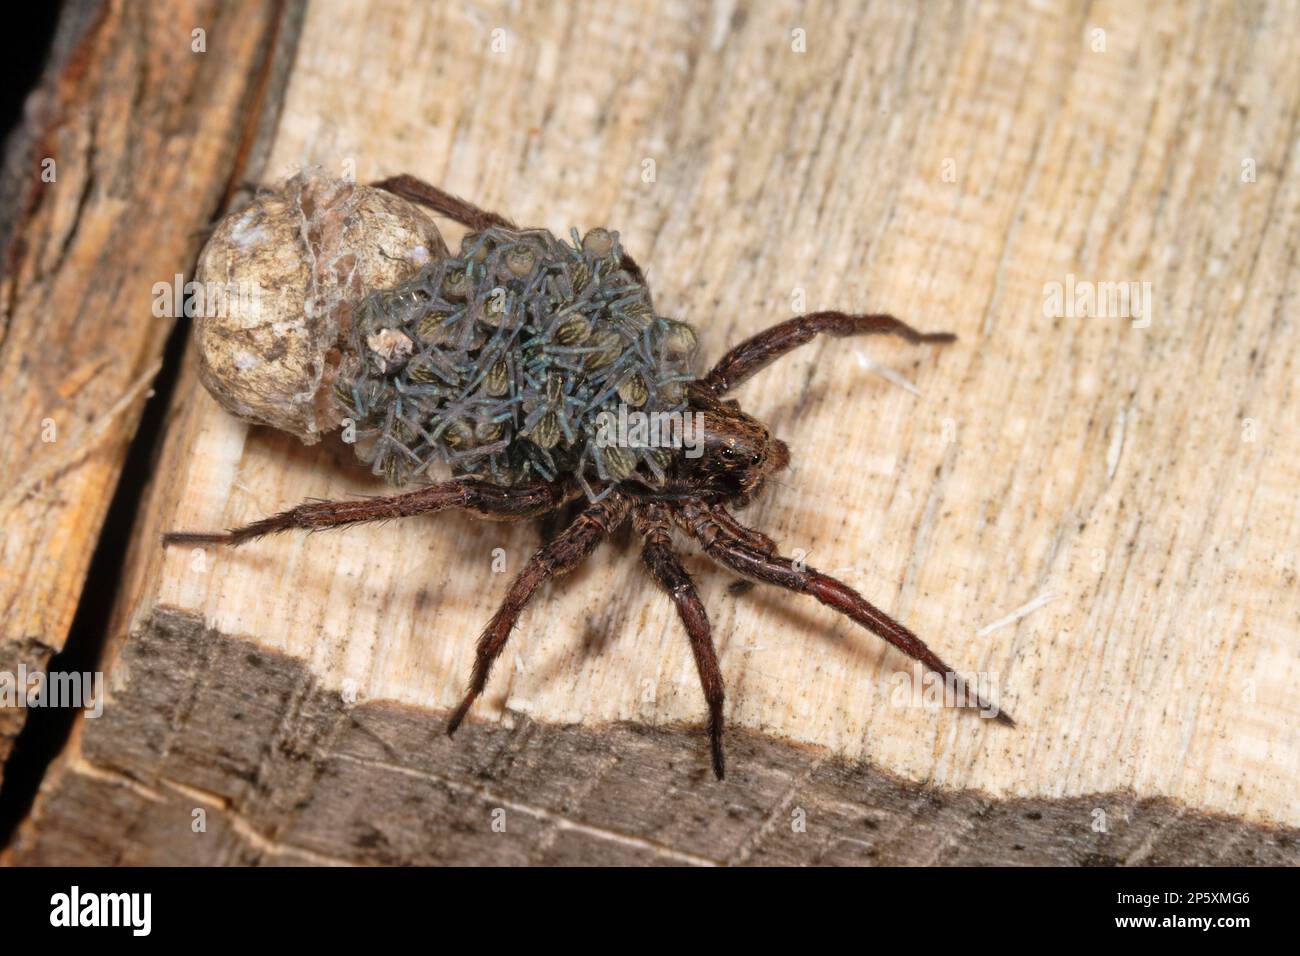 wolf spiders, ground spiders (Alopecosa cuneata), male with young spiders on the back, dorsal view, Germany Stock Photo